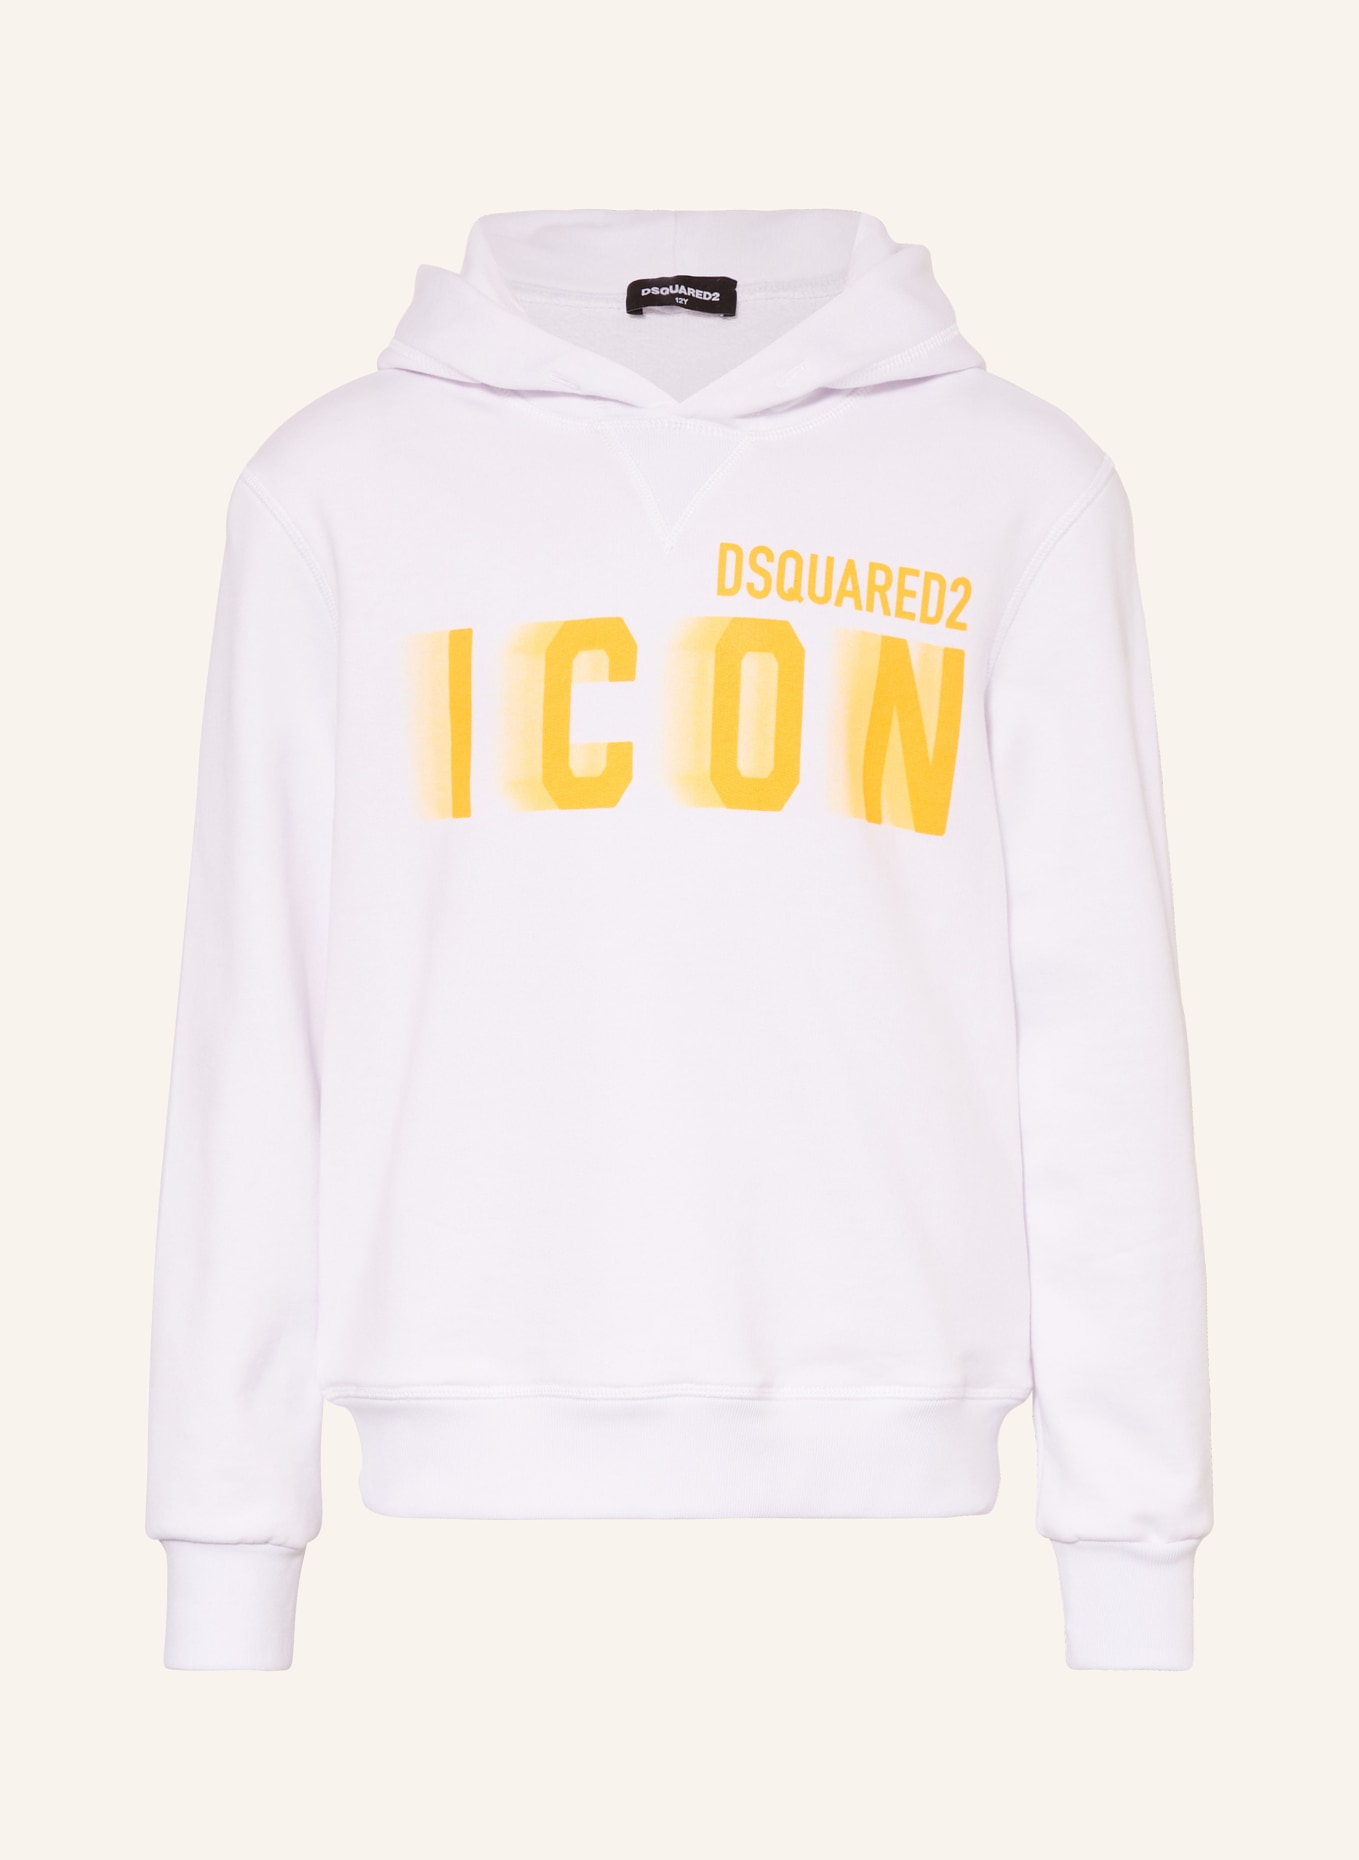 DSQUARED2 Hoodie ICON NEW, Farbe: WEISS (Bild 1)